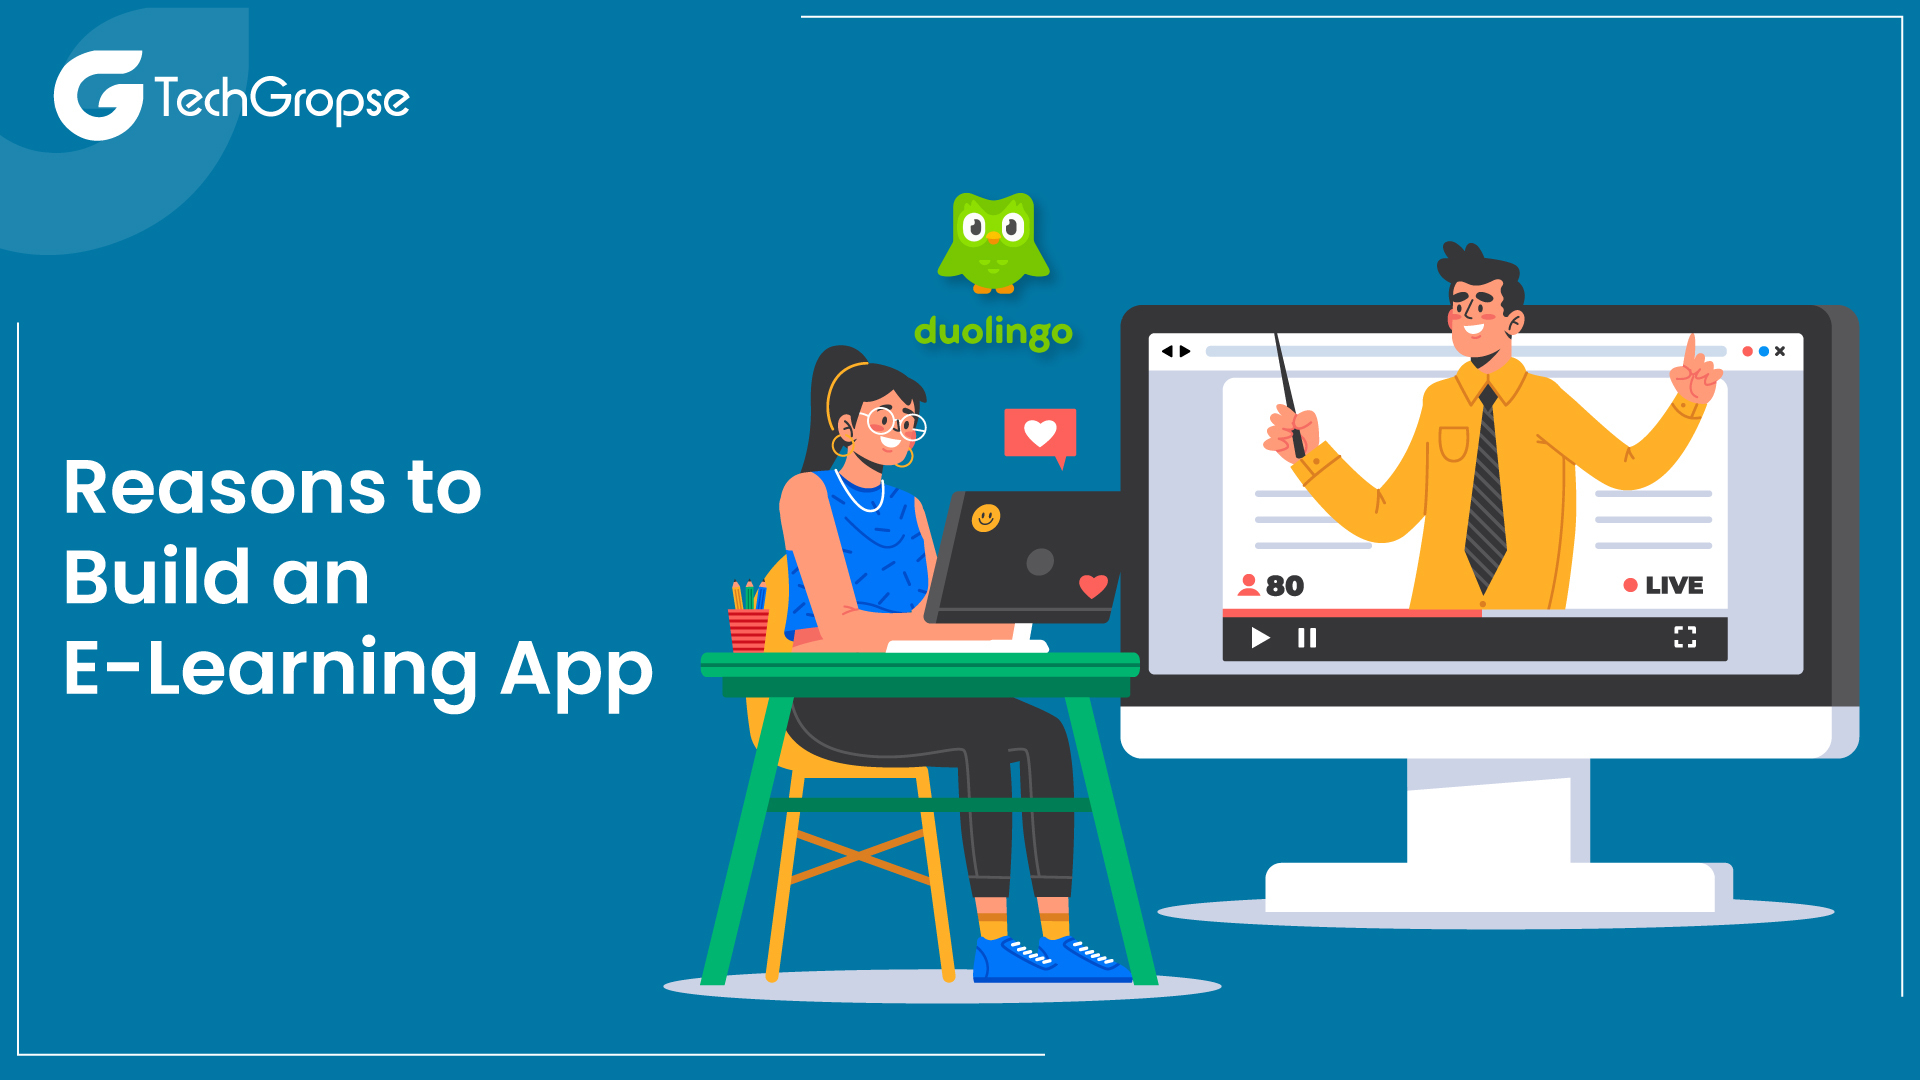 Reasons to Build an E-Learning App